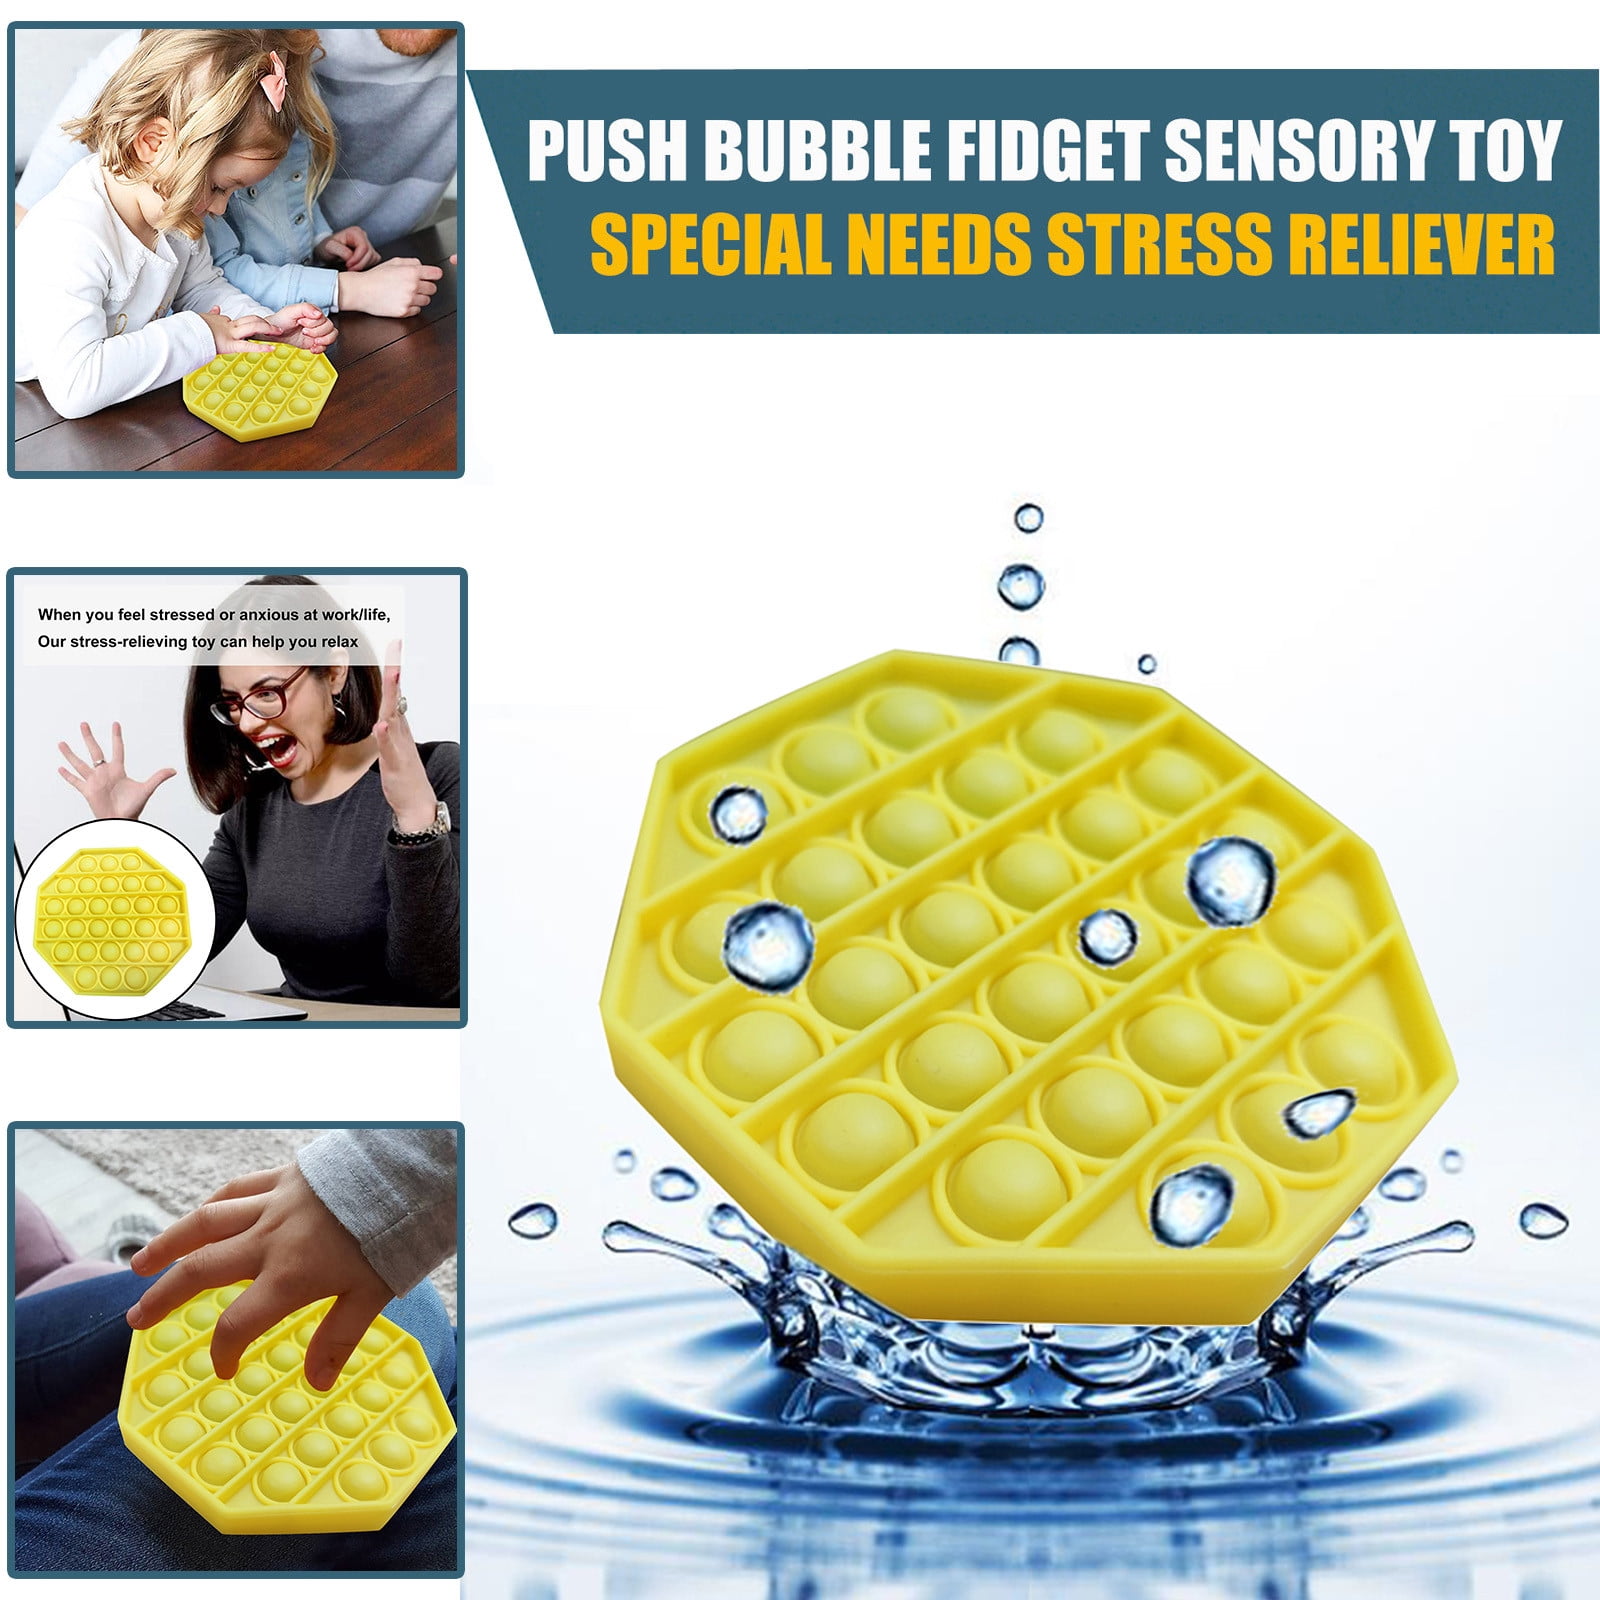 Anxiety-Relieving Toys for Special Needs of Autism and Stress Relief Washable and Reusable Squeeze-Bubble Characteristic Induction Toys Round 3pcs 3pcs Push-Bubble Sensory Fixed Toys